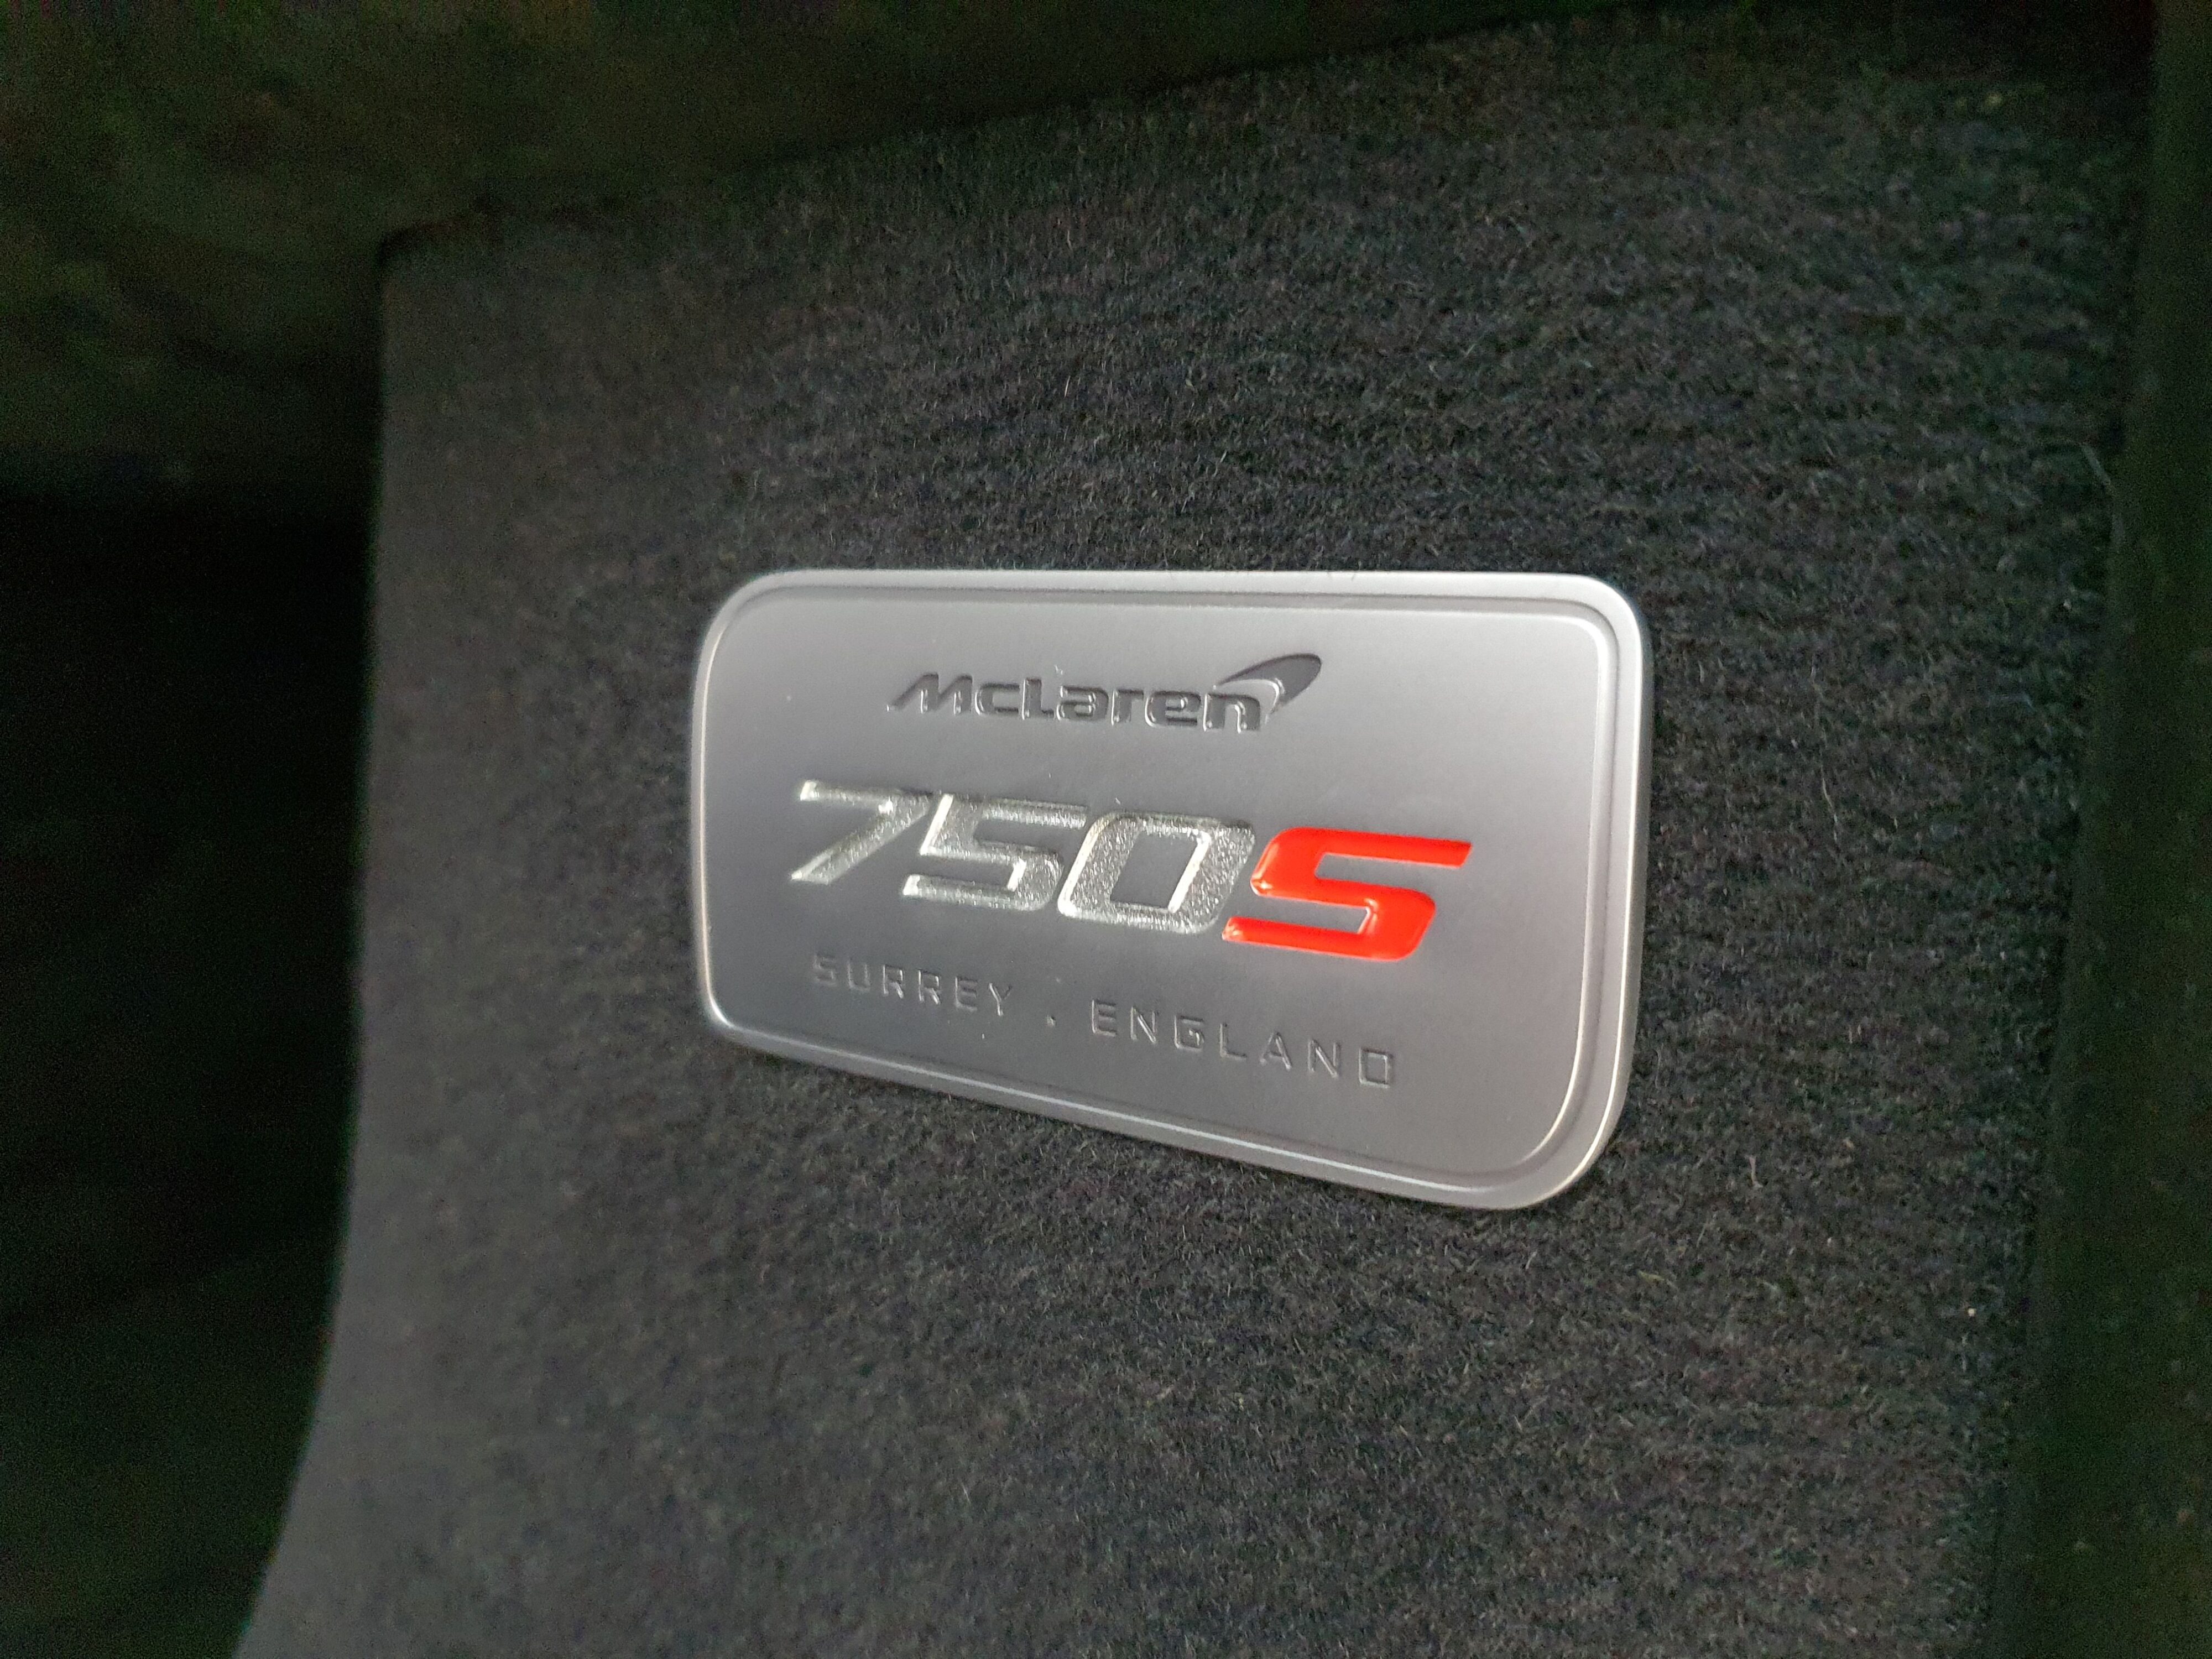 A close up of the McLaren 750S badge on the new McLaren 750S badge at McLaren Auckland.